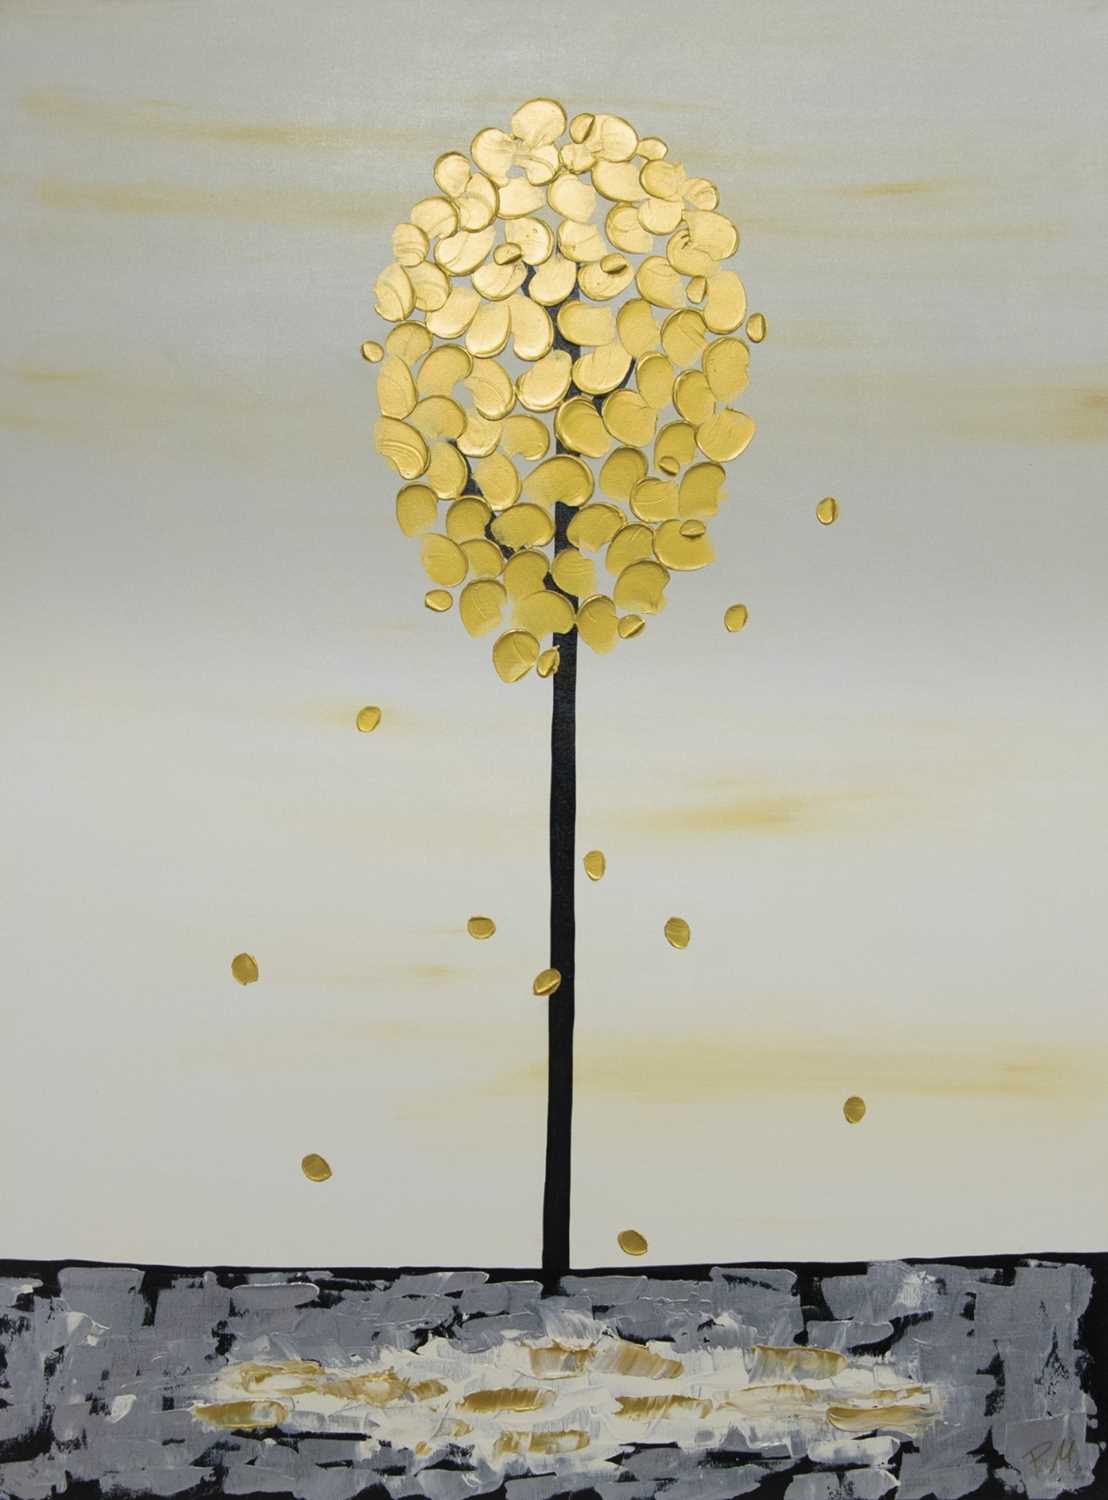 Lot 562 - THE GOLDEN TREE, AN ACRYLIC BY PIERO MONTANELLI